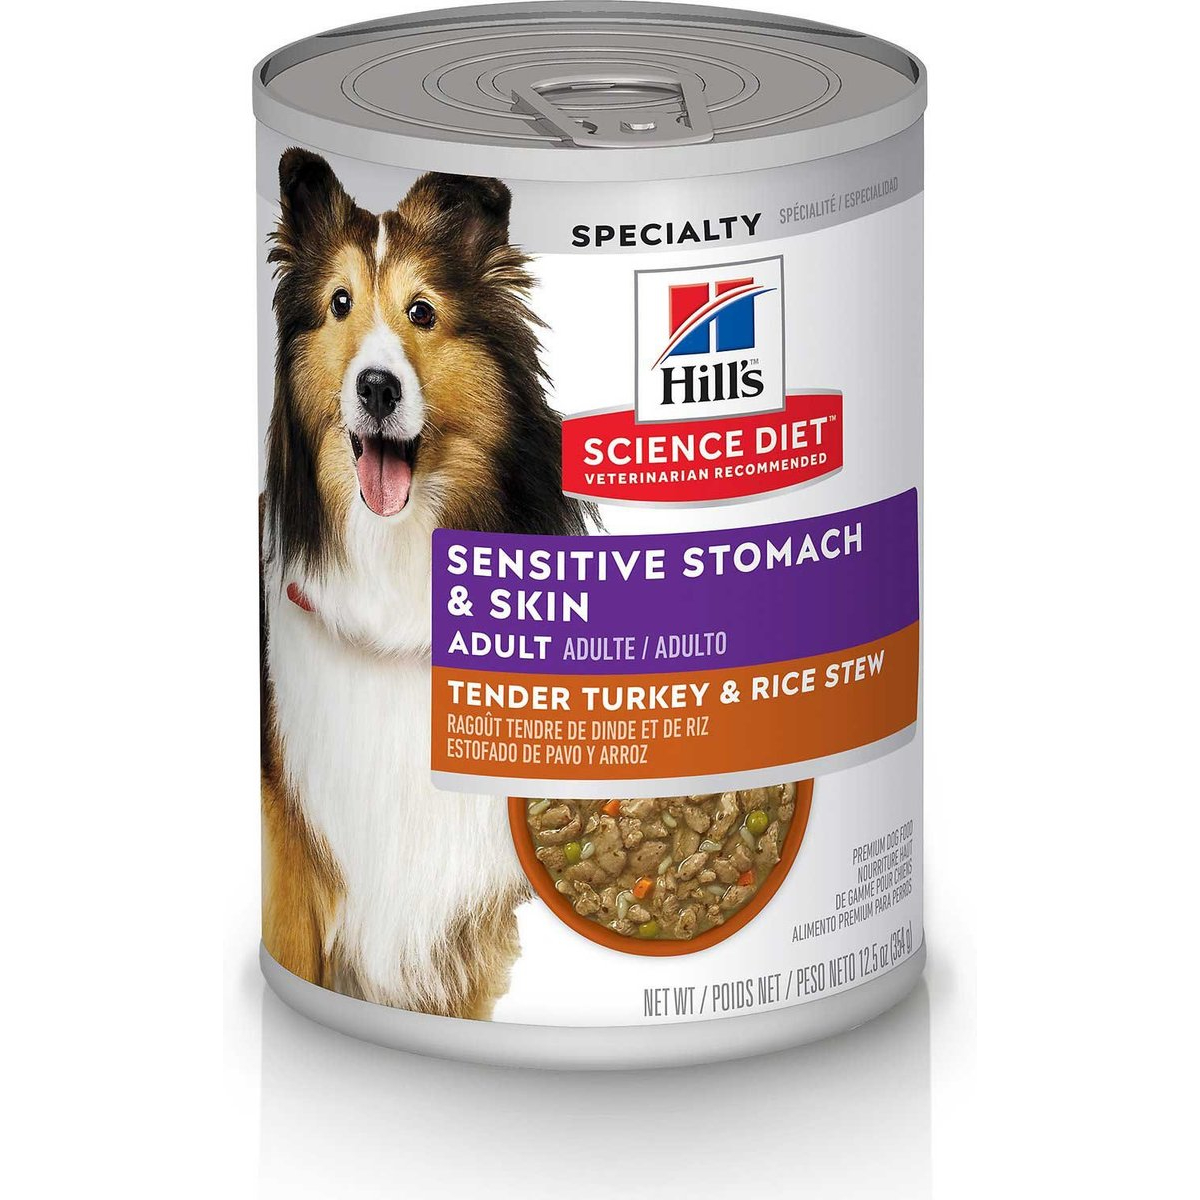 Hill's Science Diet Adult Sensitive Stomach & Skin Tender Turkey & Rice Stew Canned Dog Foo